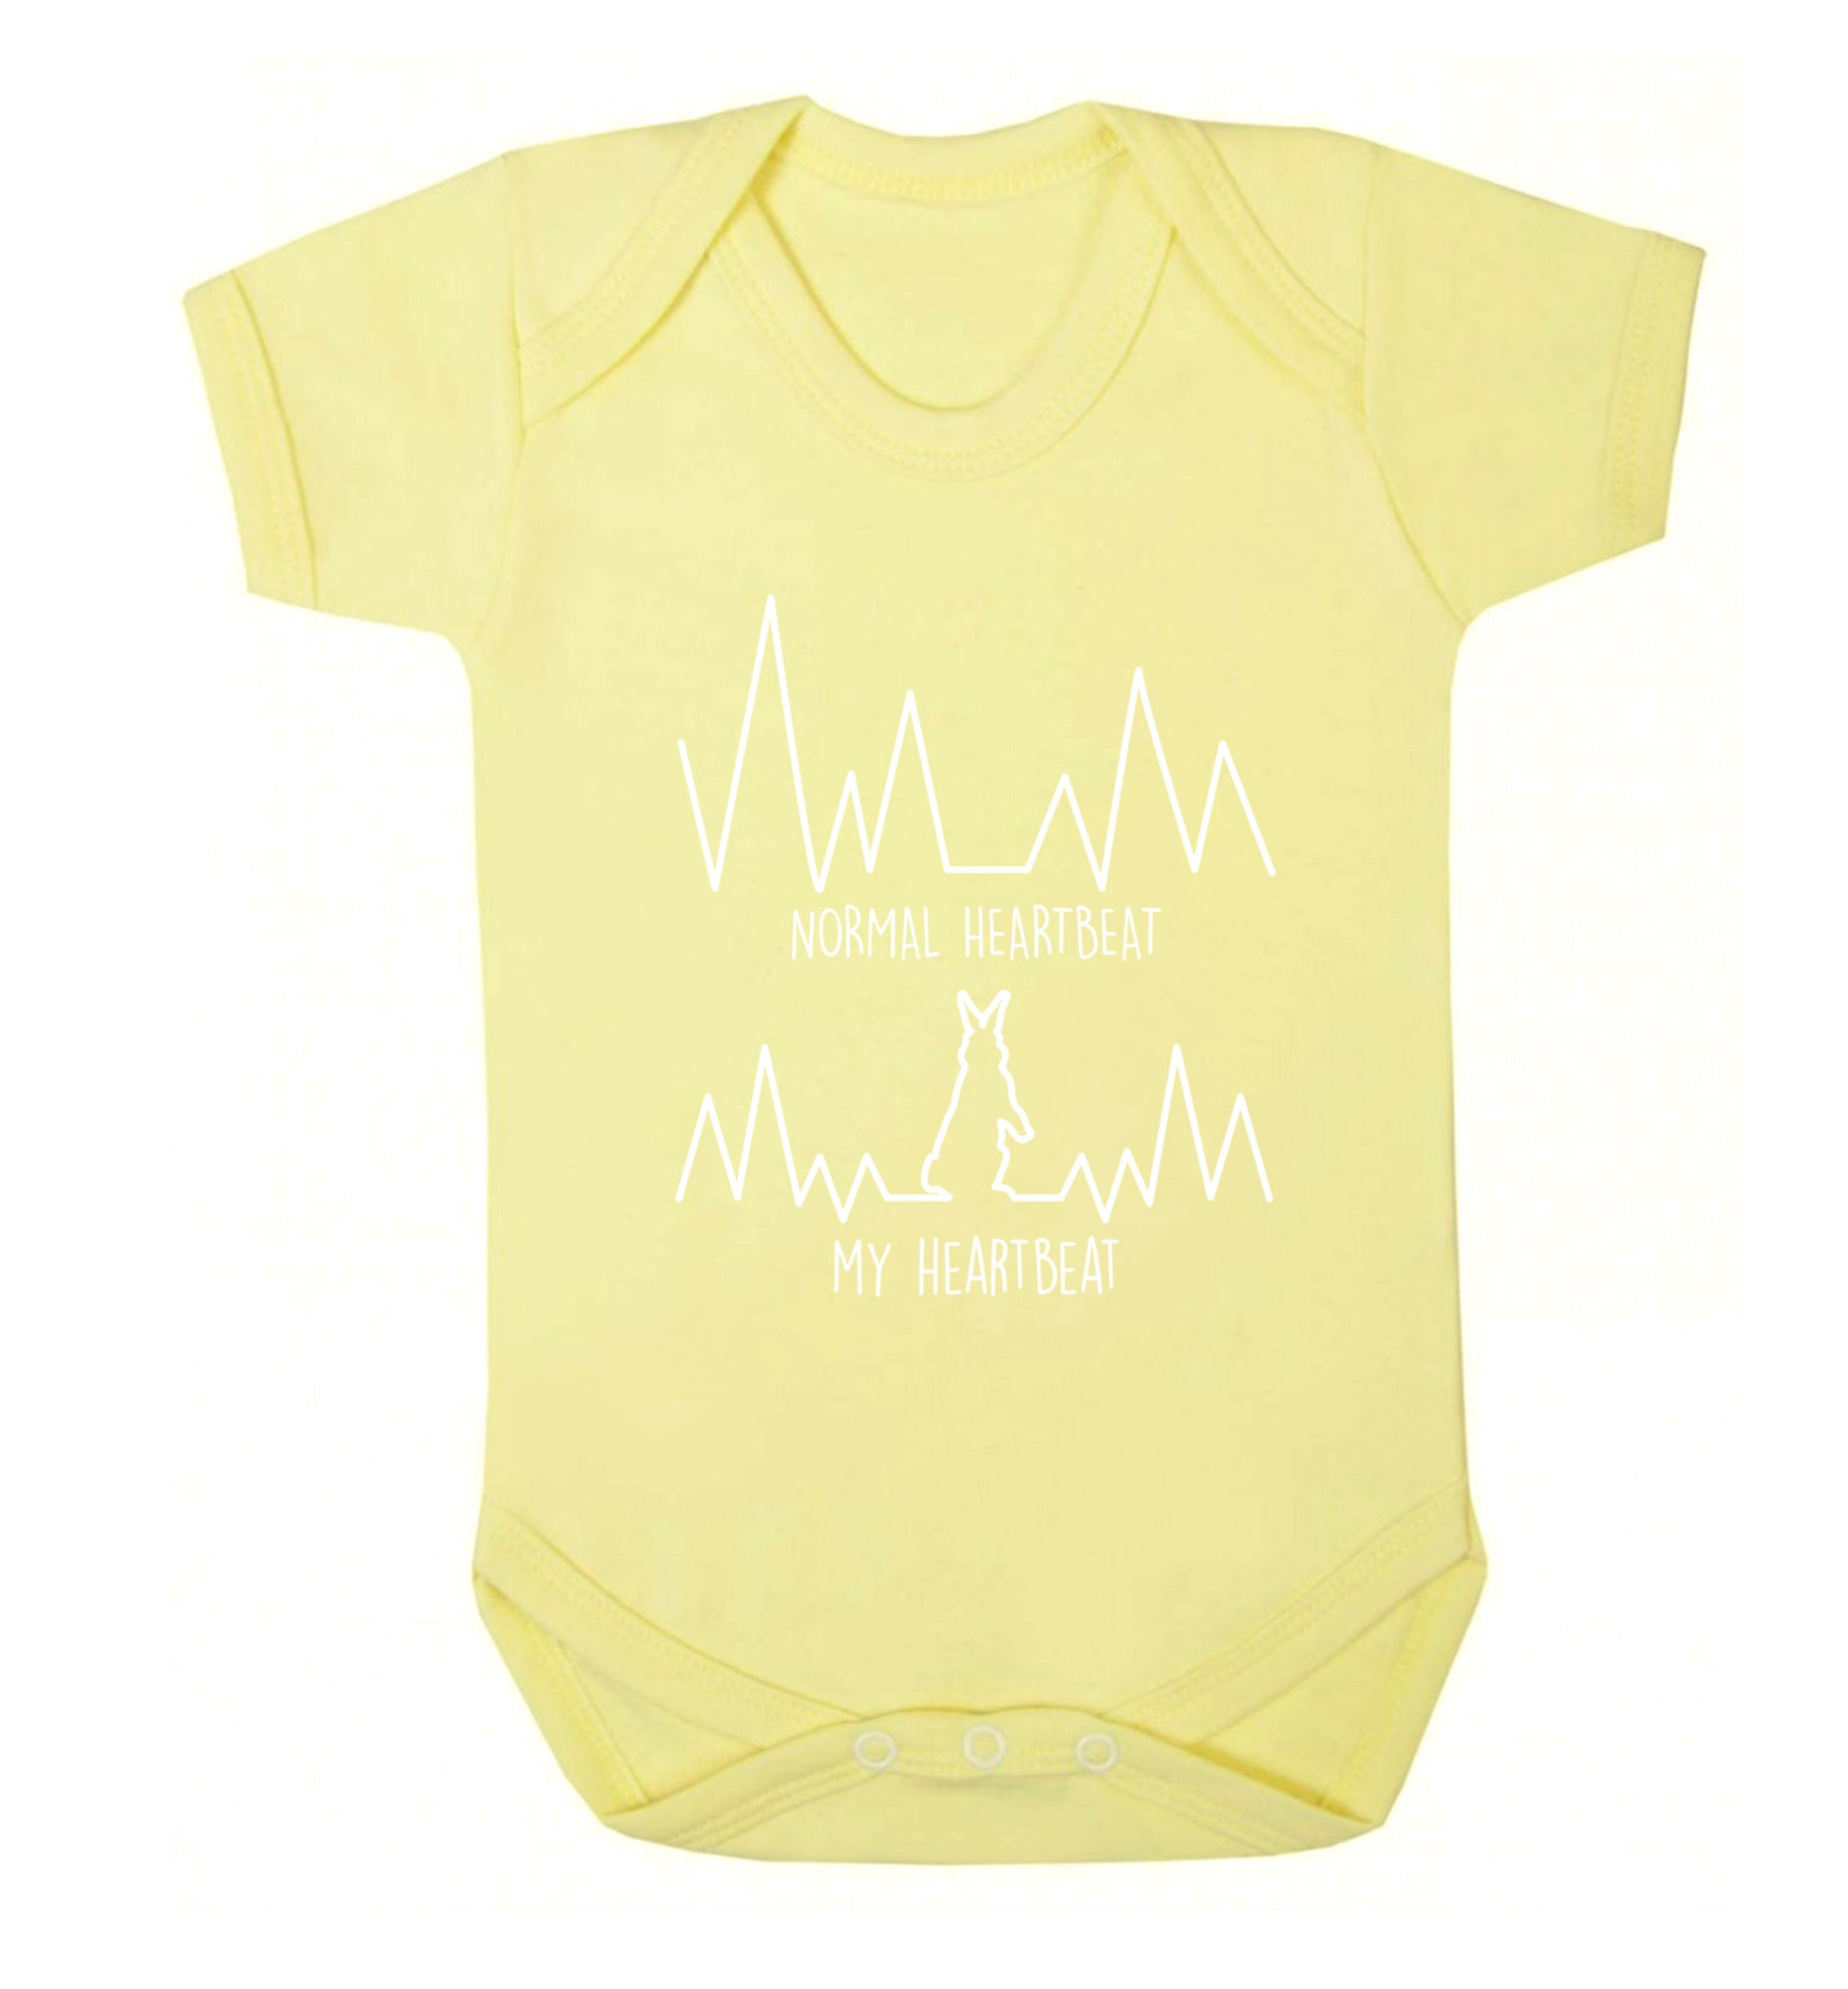 Normal heartbeat, my heartbeat rabbit lover Baby Vest pale yellow 18-24 months